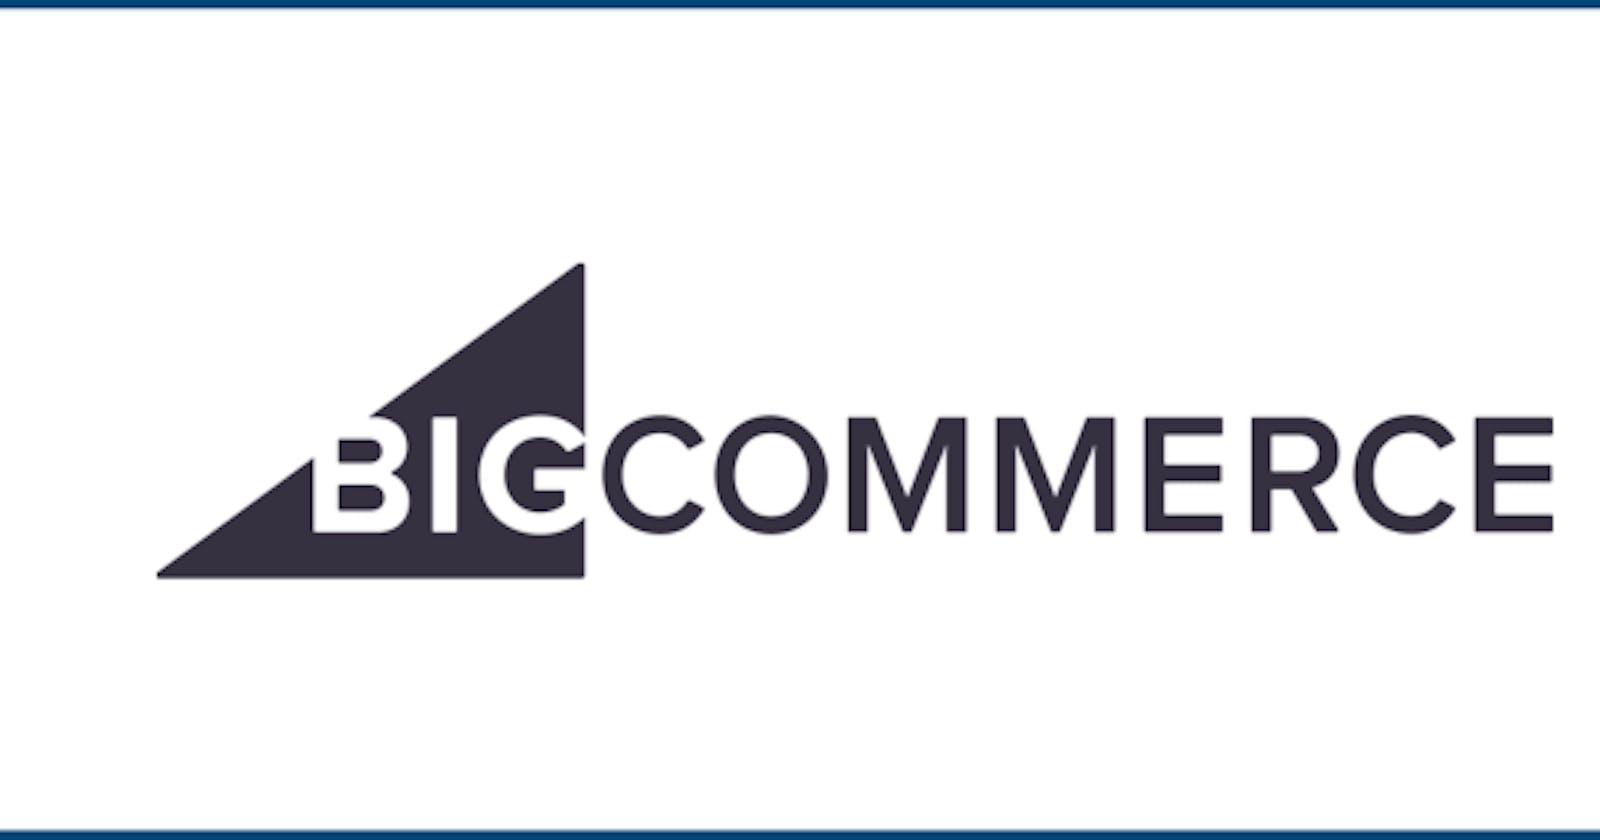 5 Reasons Why BigCommerce is an Ideal eCommerce Platform